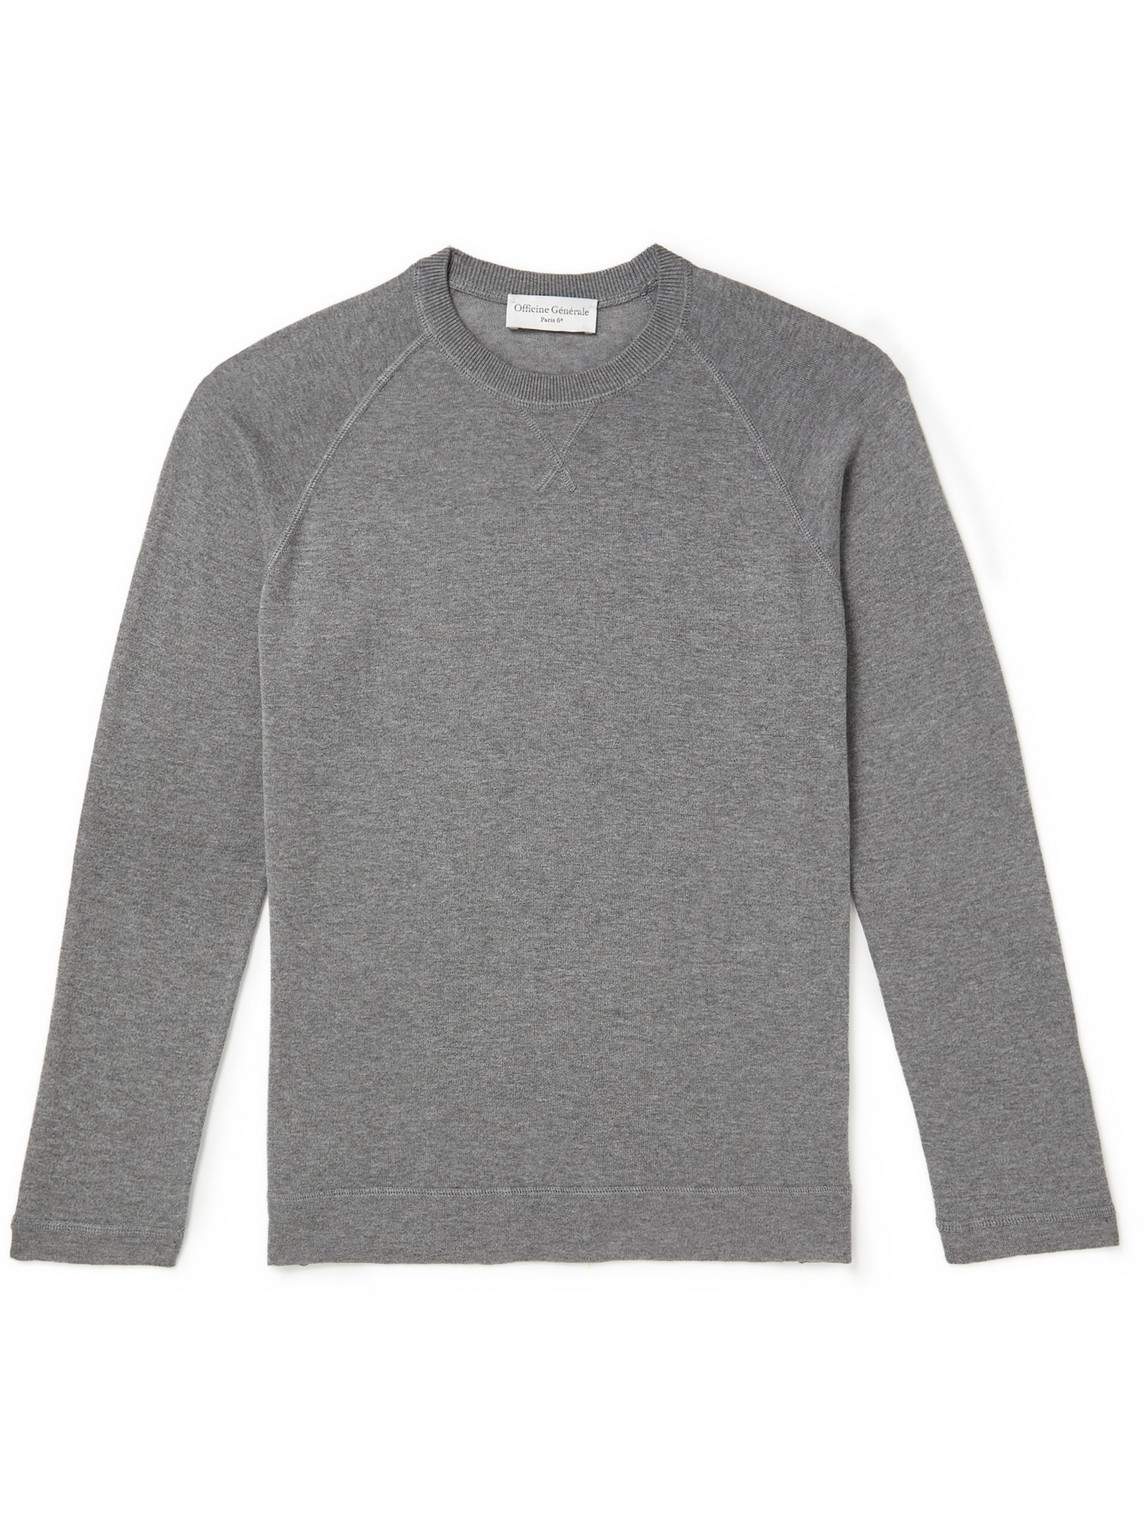 OFFICINE GENERALE NATE COTTON AND LYOCELL-BLEND SWEATER